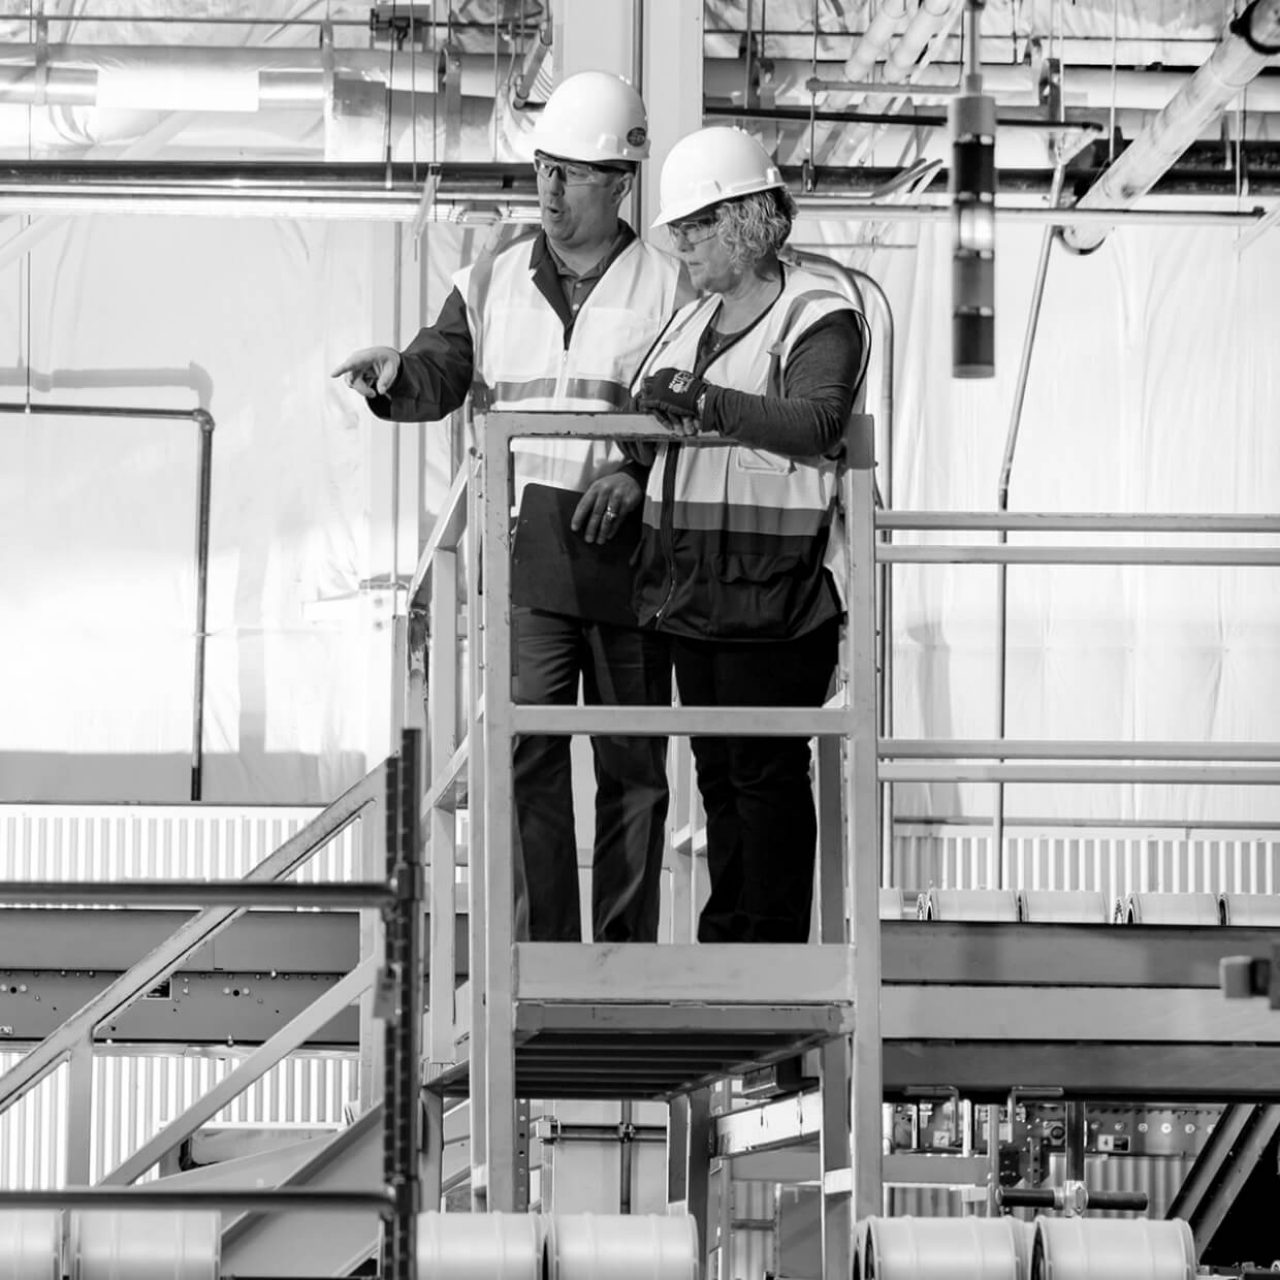 Industrial setting with two people in hard hats at the top of a metal stairway.